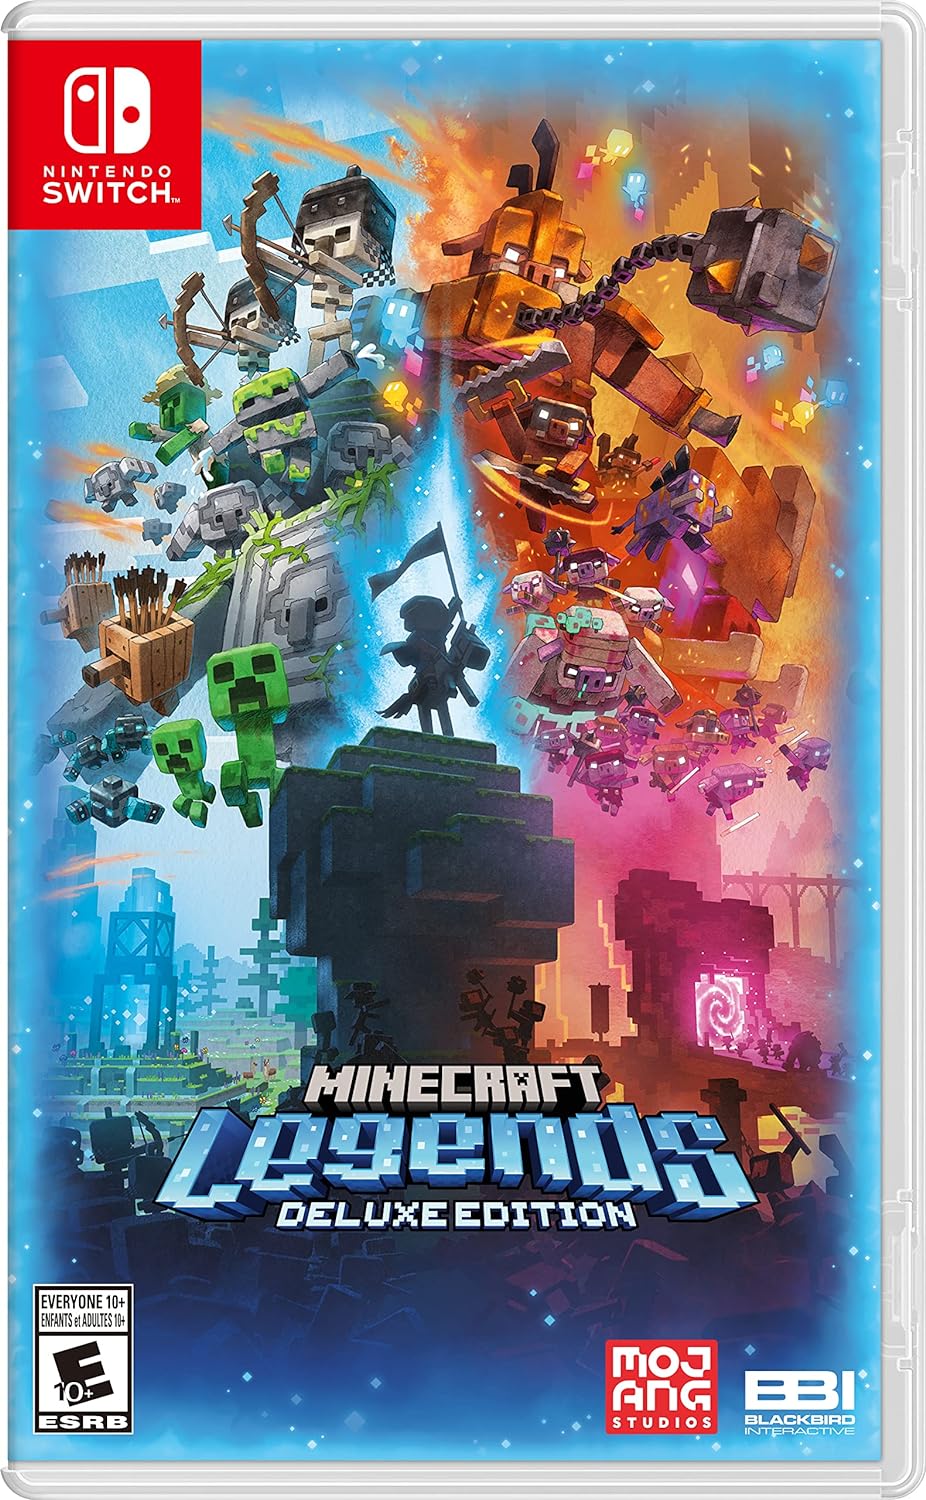 Minecraft Legends Deluxe Edition (Nintendo Switch Physical) $25 + Free Shipping